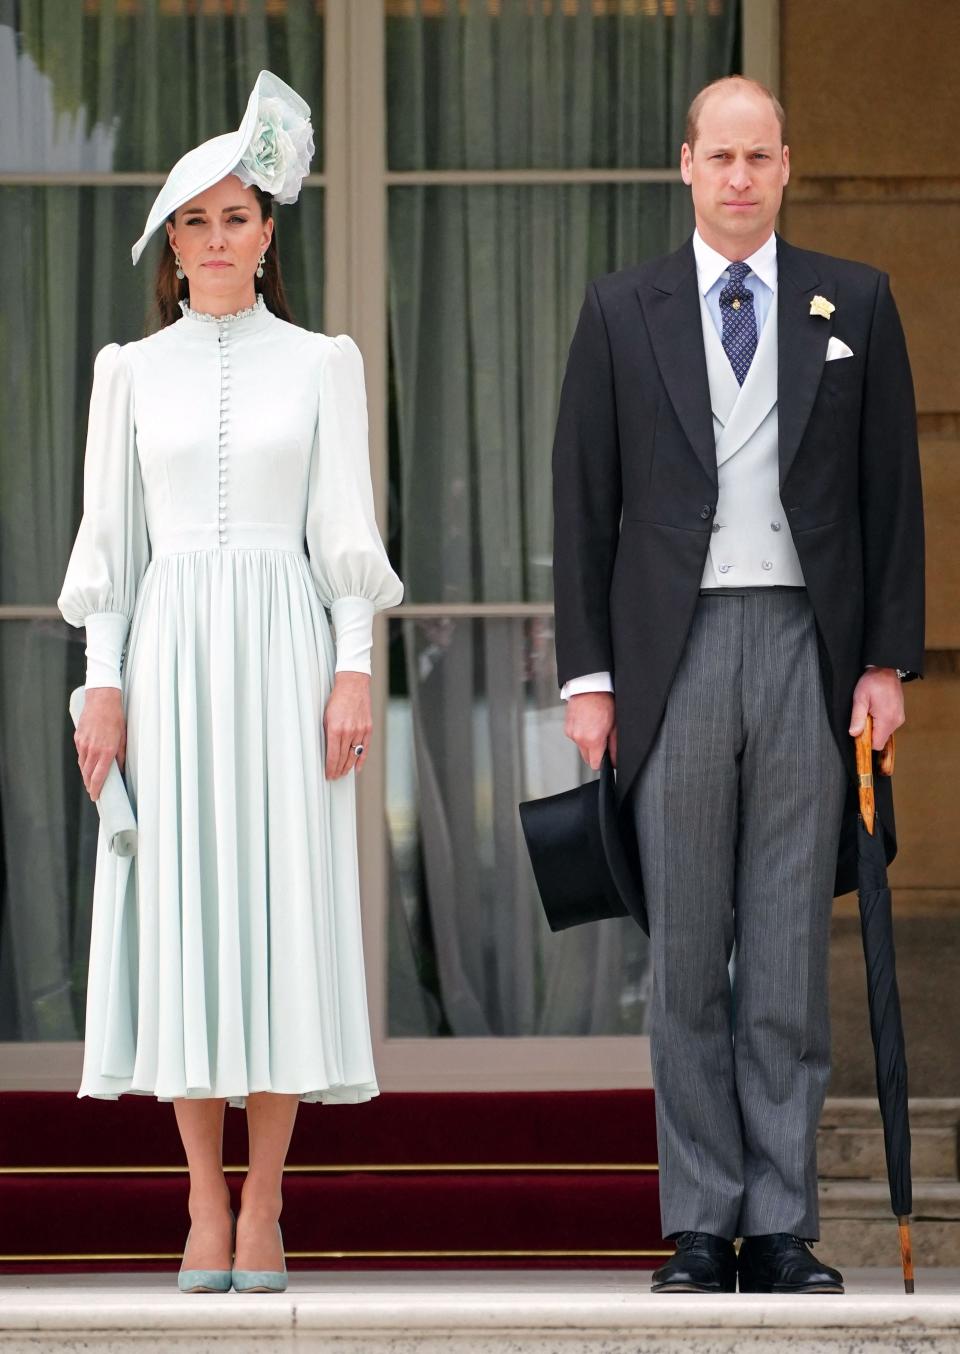 Duchess Kate and Prince William stand at attention for the national anthem before plunging into the crowd at the latest royal Garden Party at Buckingham Palace on May 25, 2022. Kate wore a pale blue-green dress with a high collar, buttons down the bodice and full skirt and sleeves.